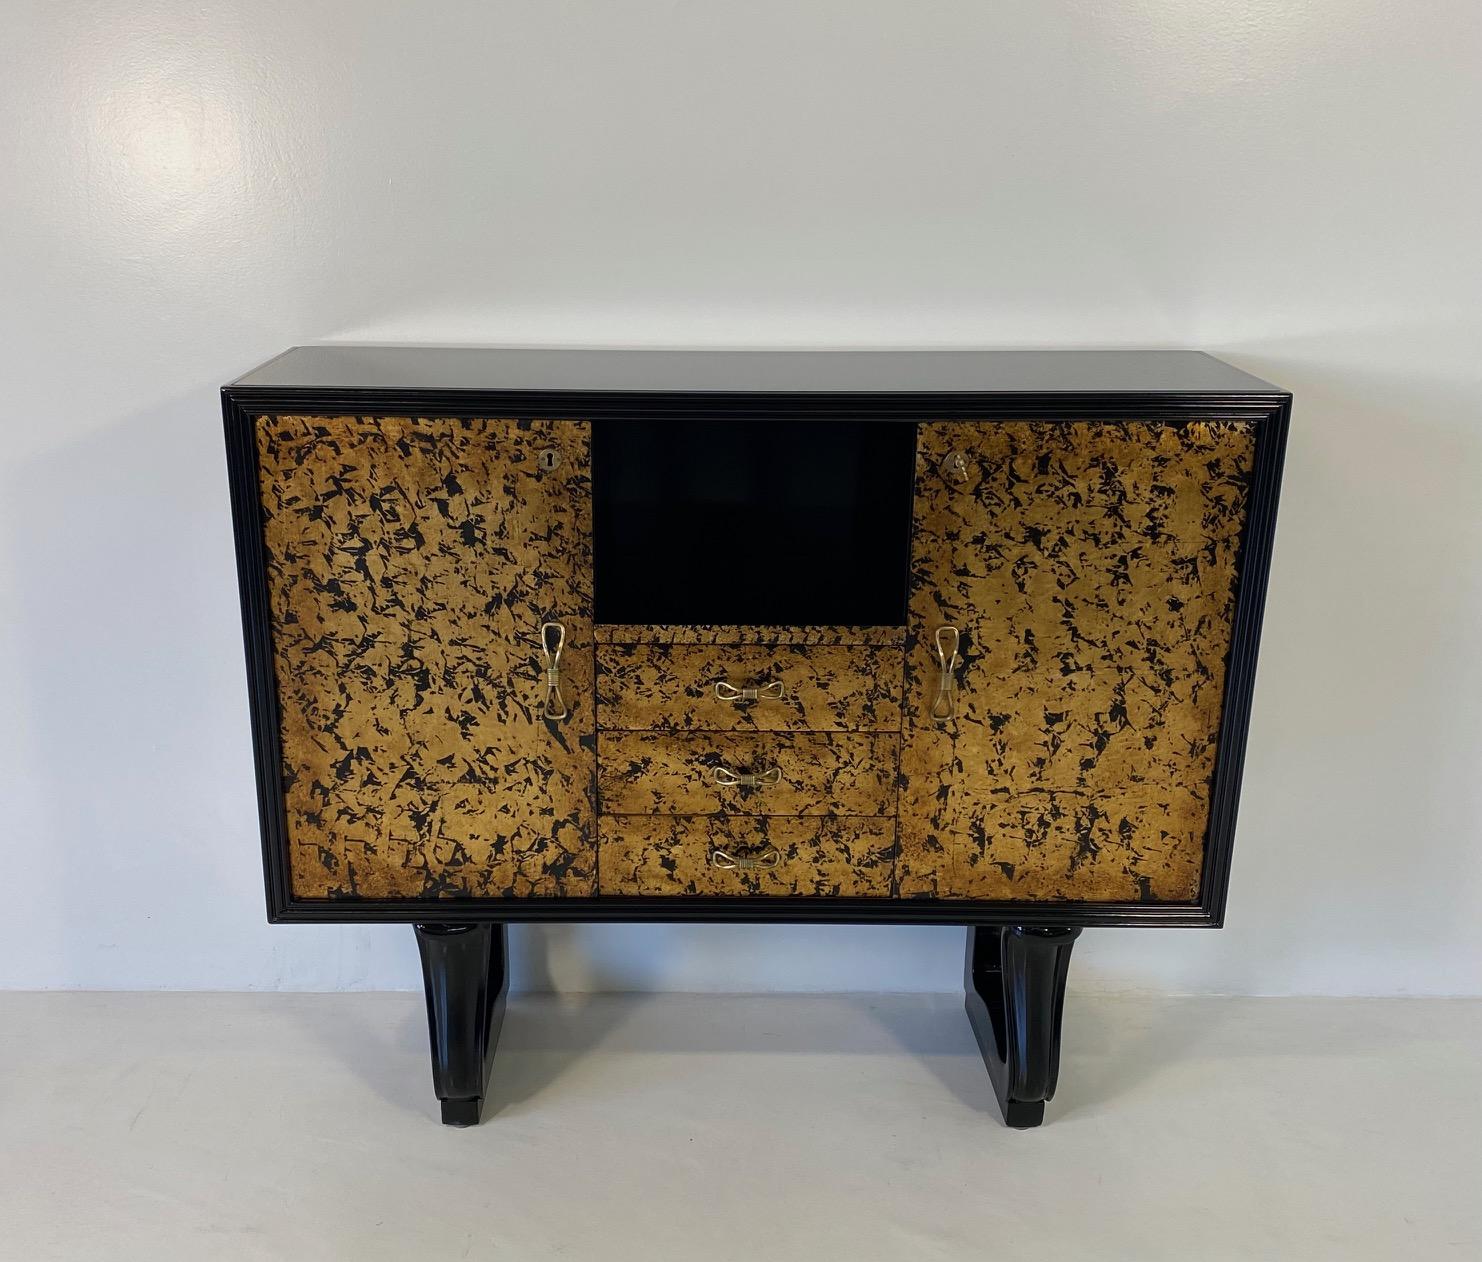 This cabinet was produced in Italy in the 1940s.
The structure is black lacquered, while the three central drawers and the two doors are decorated with gold leaf, the top is a black glass.